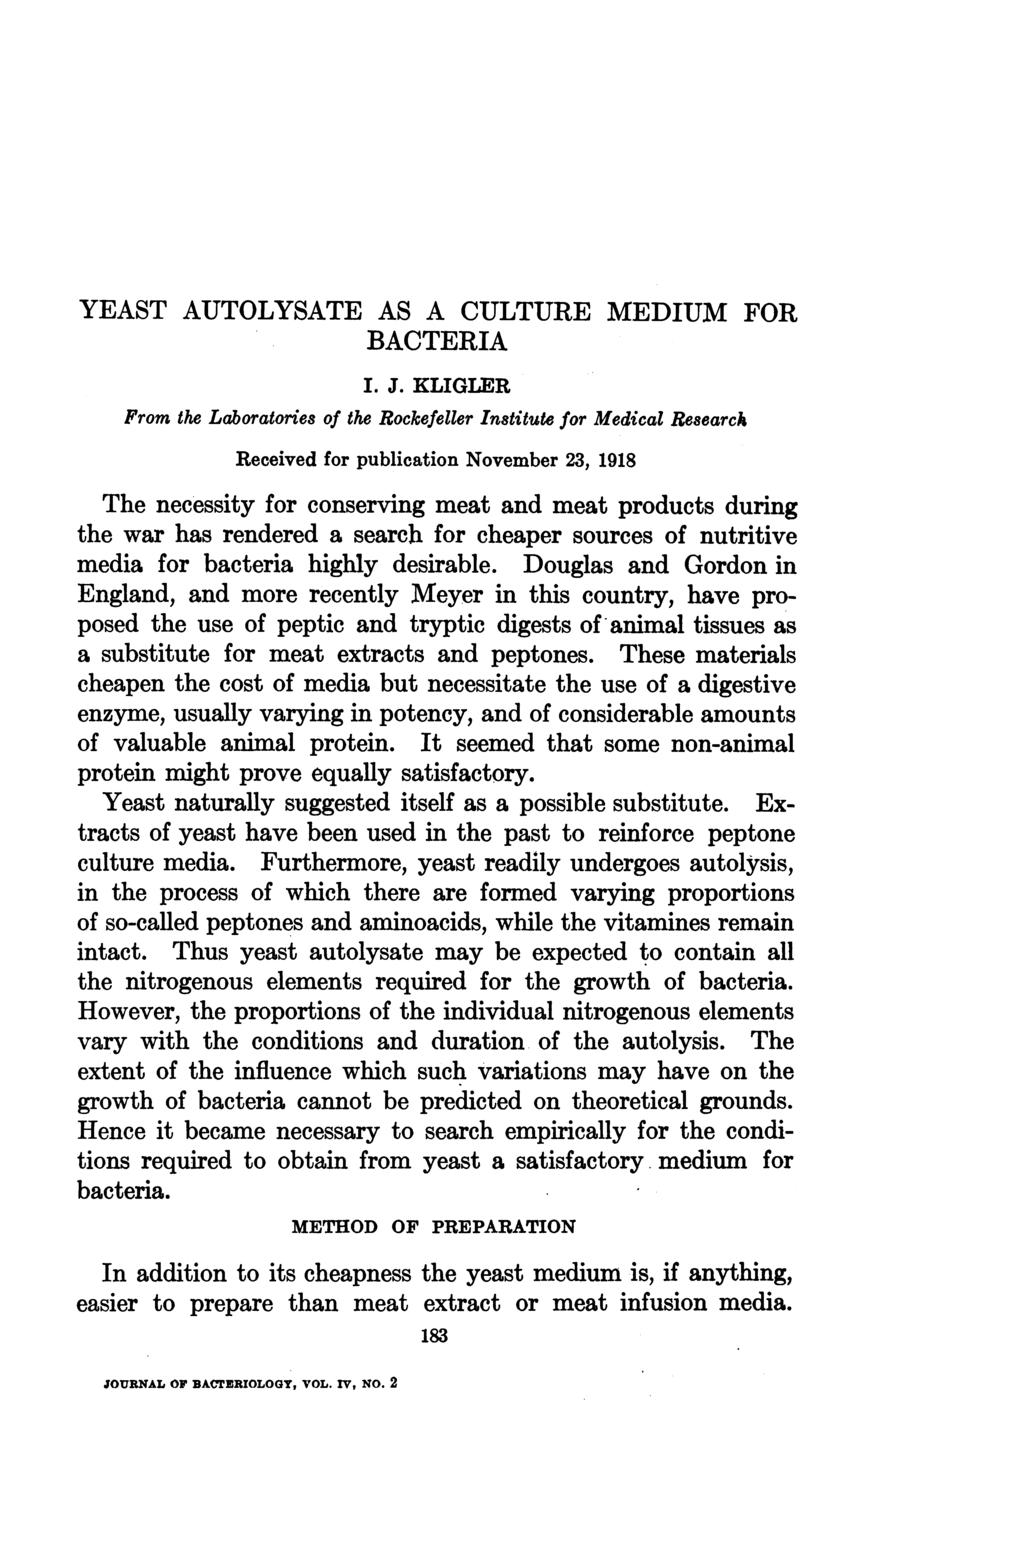 YEAST AUTOLYSATE AS A CULTURE MEDIUM FOR BACTERIA I. J.